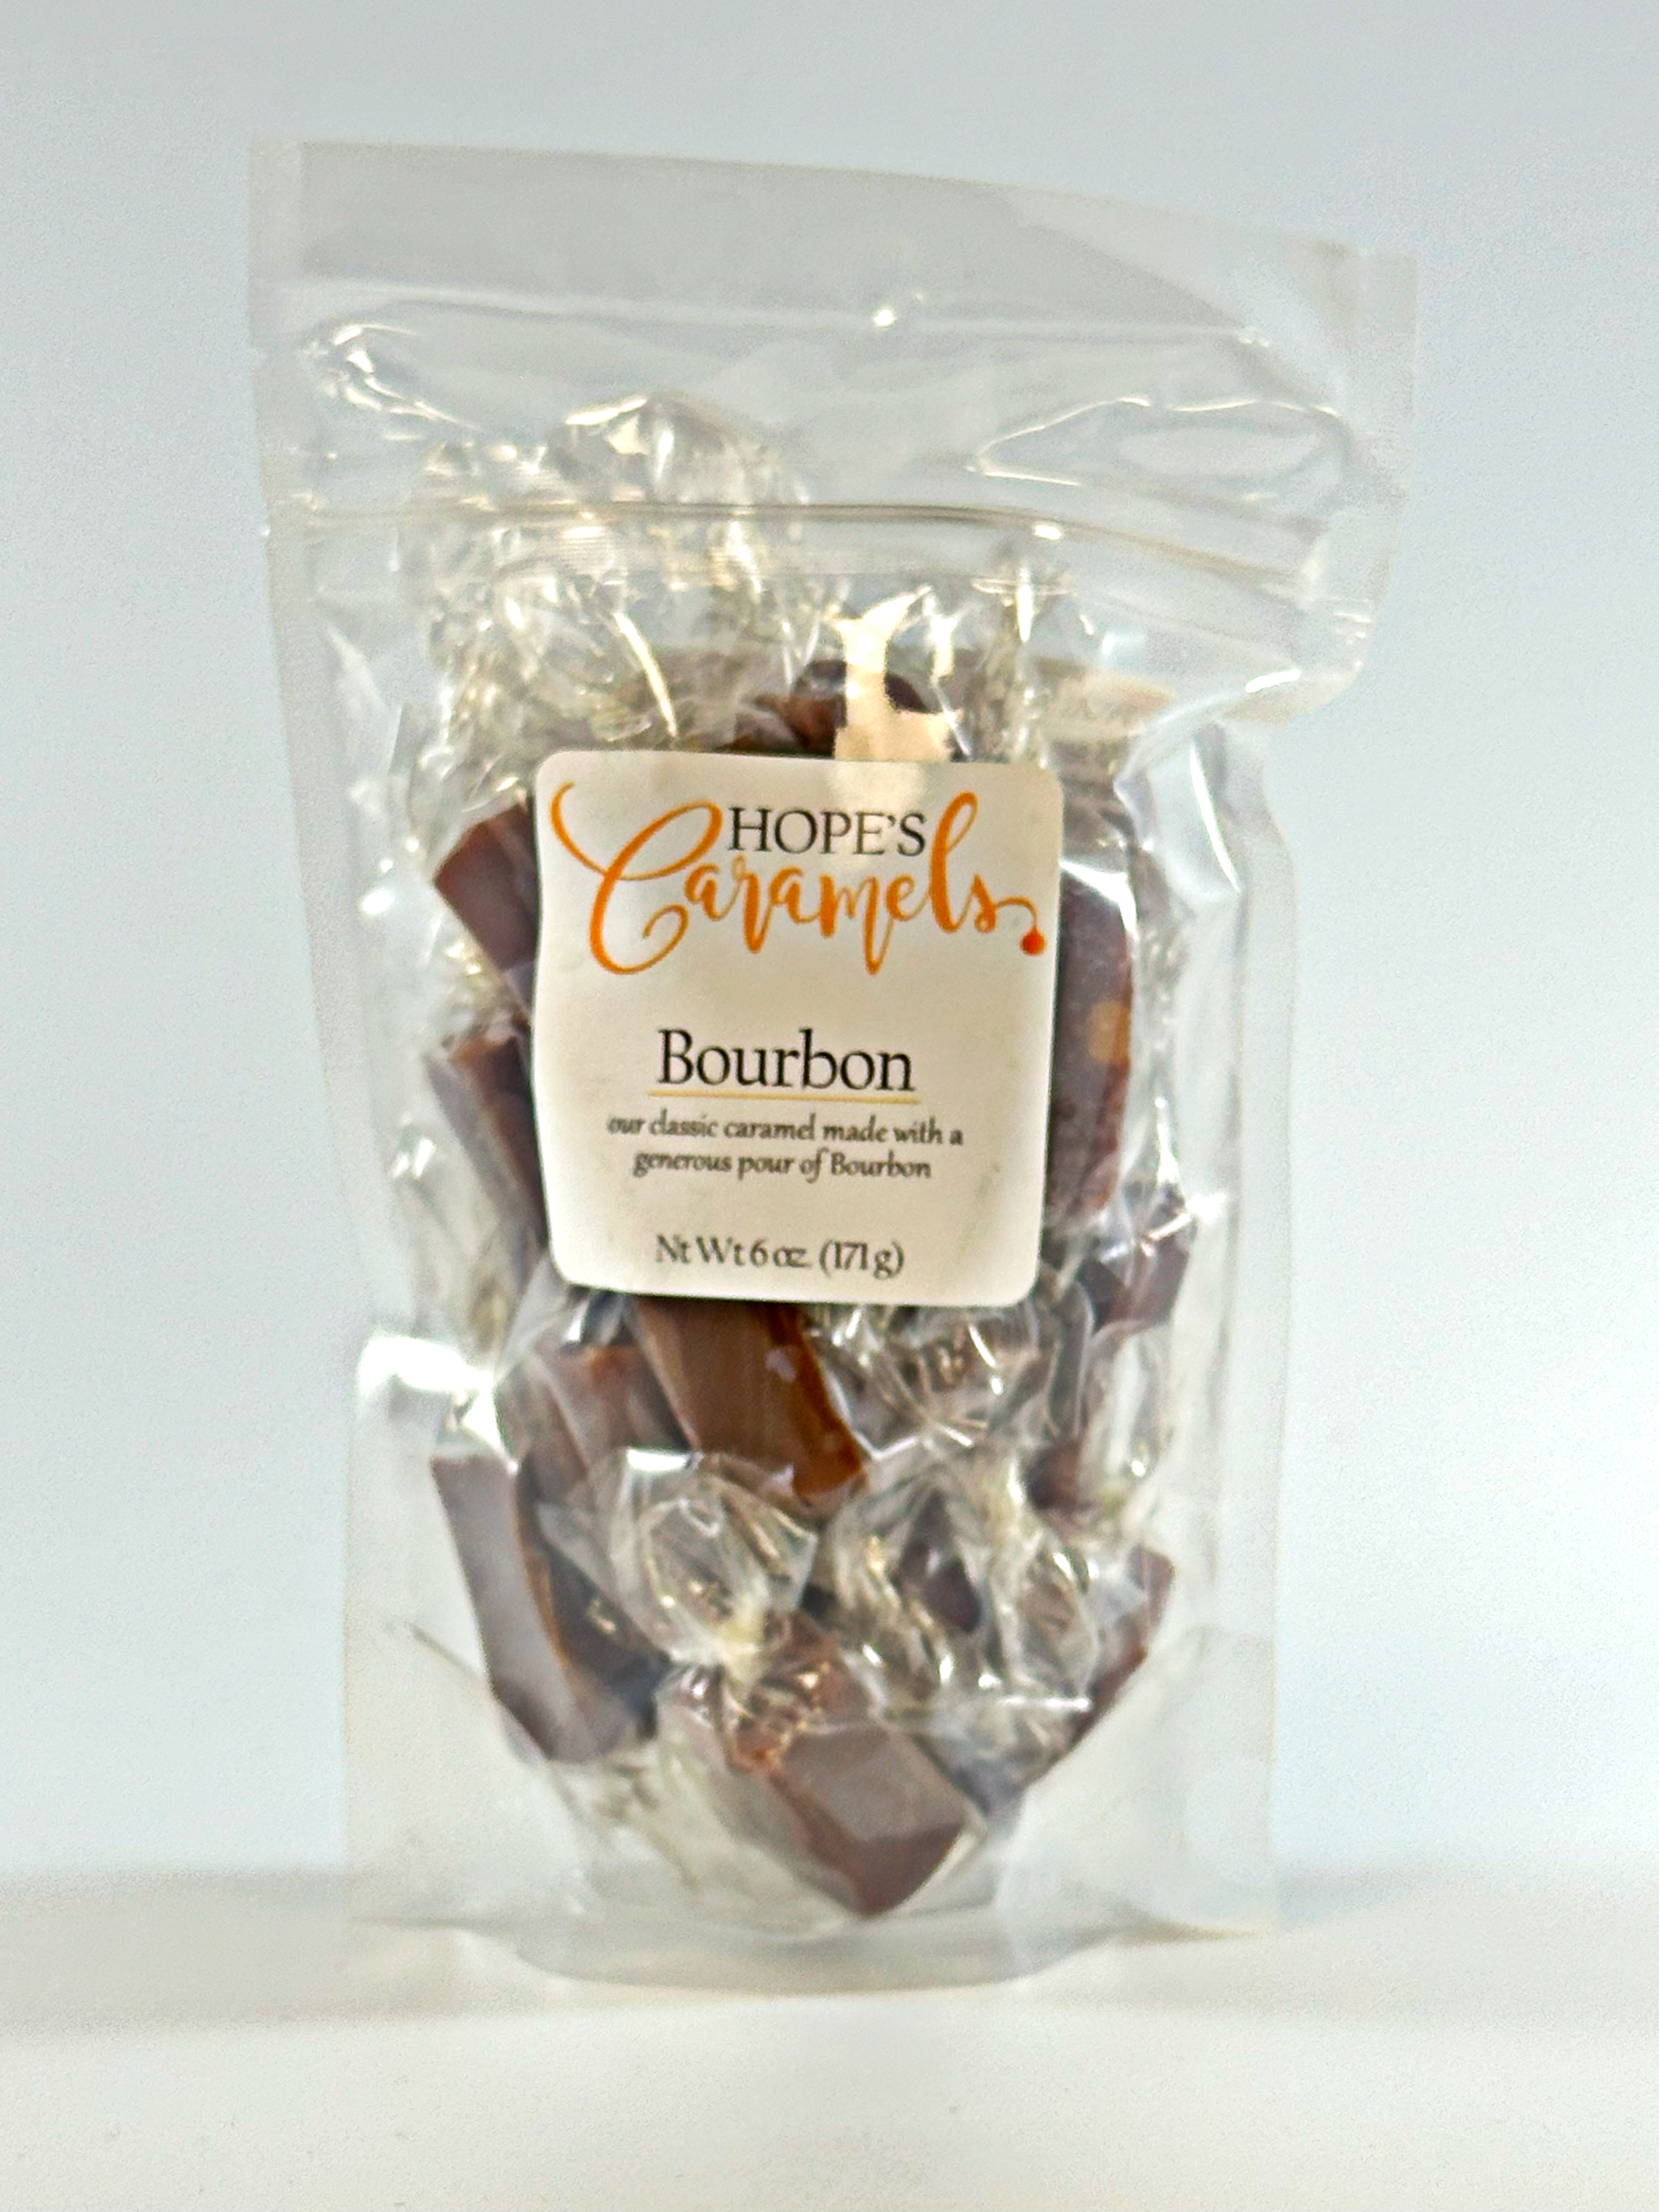 Clear bag filled with Bourbon flavored caramels